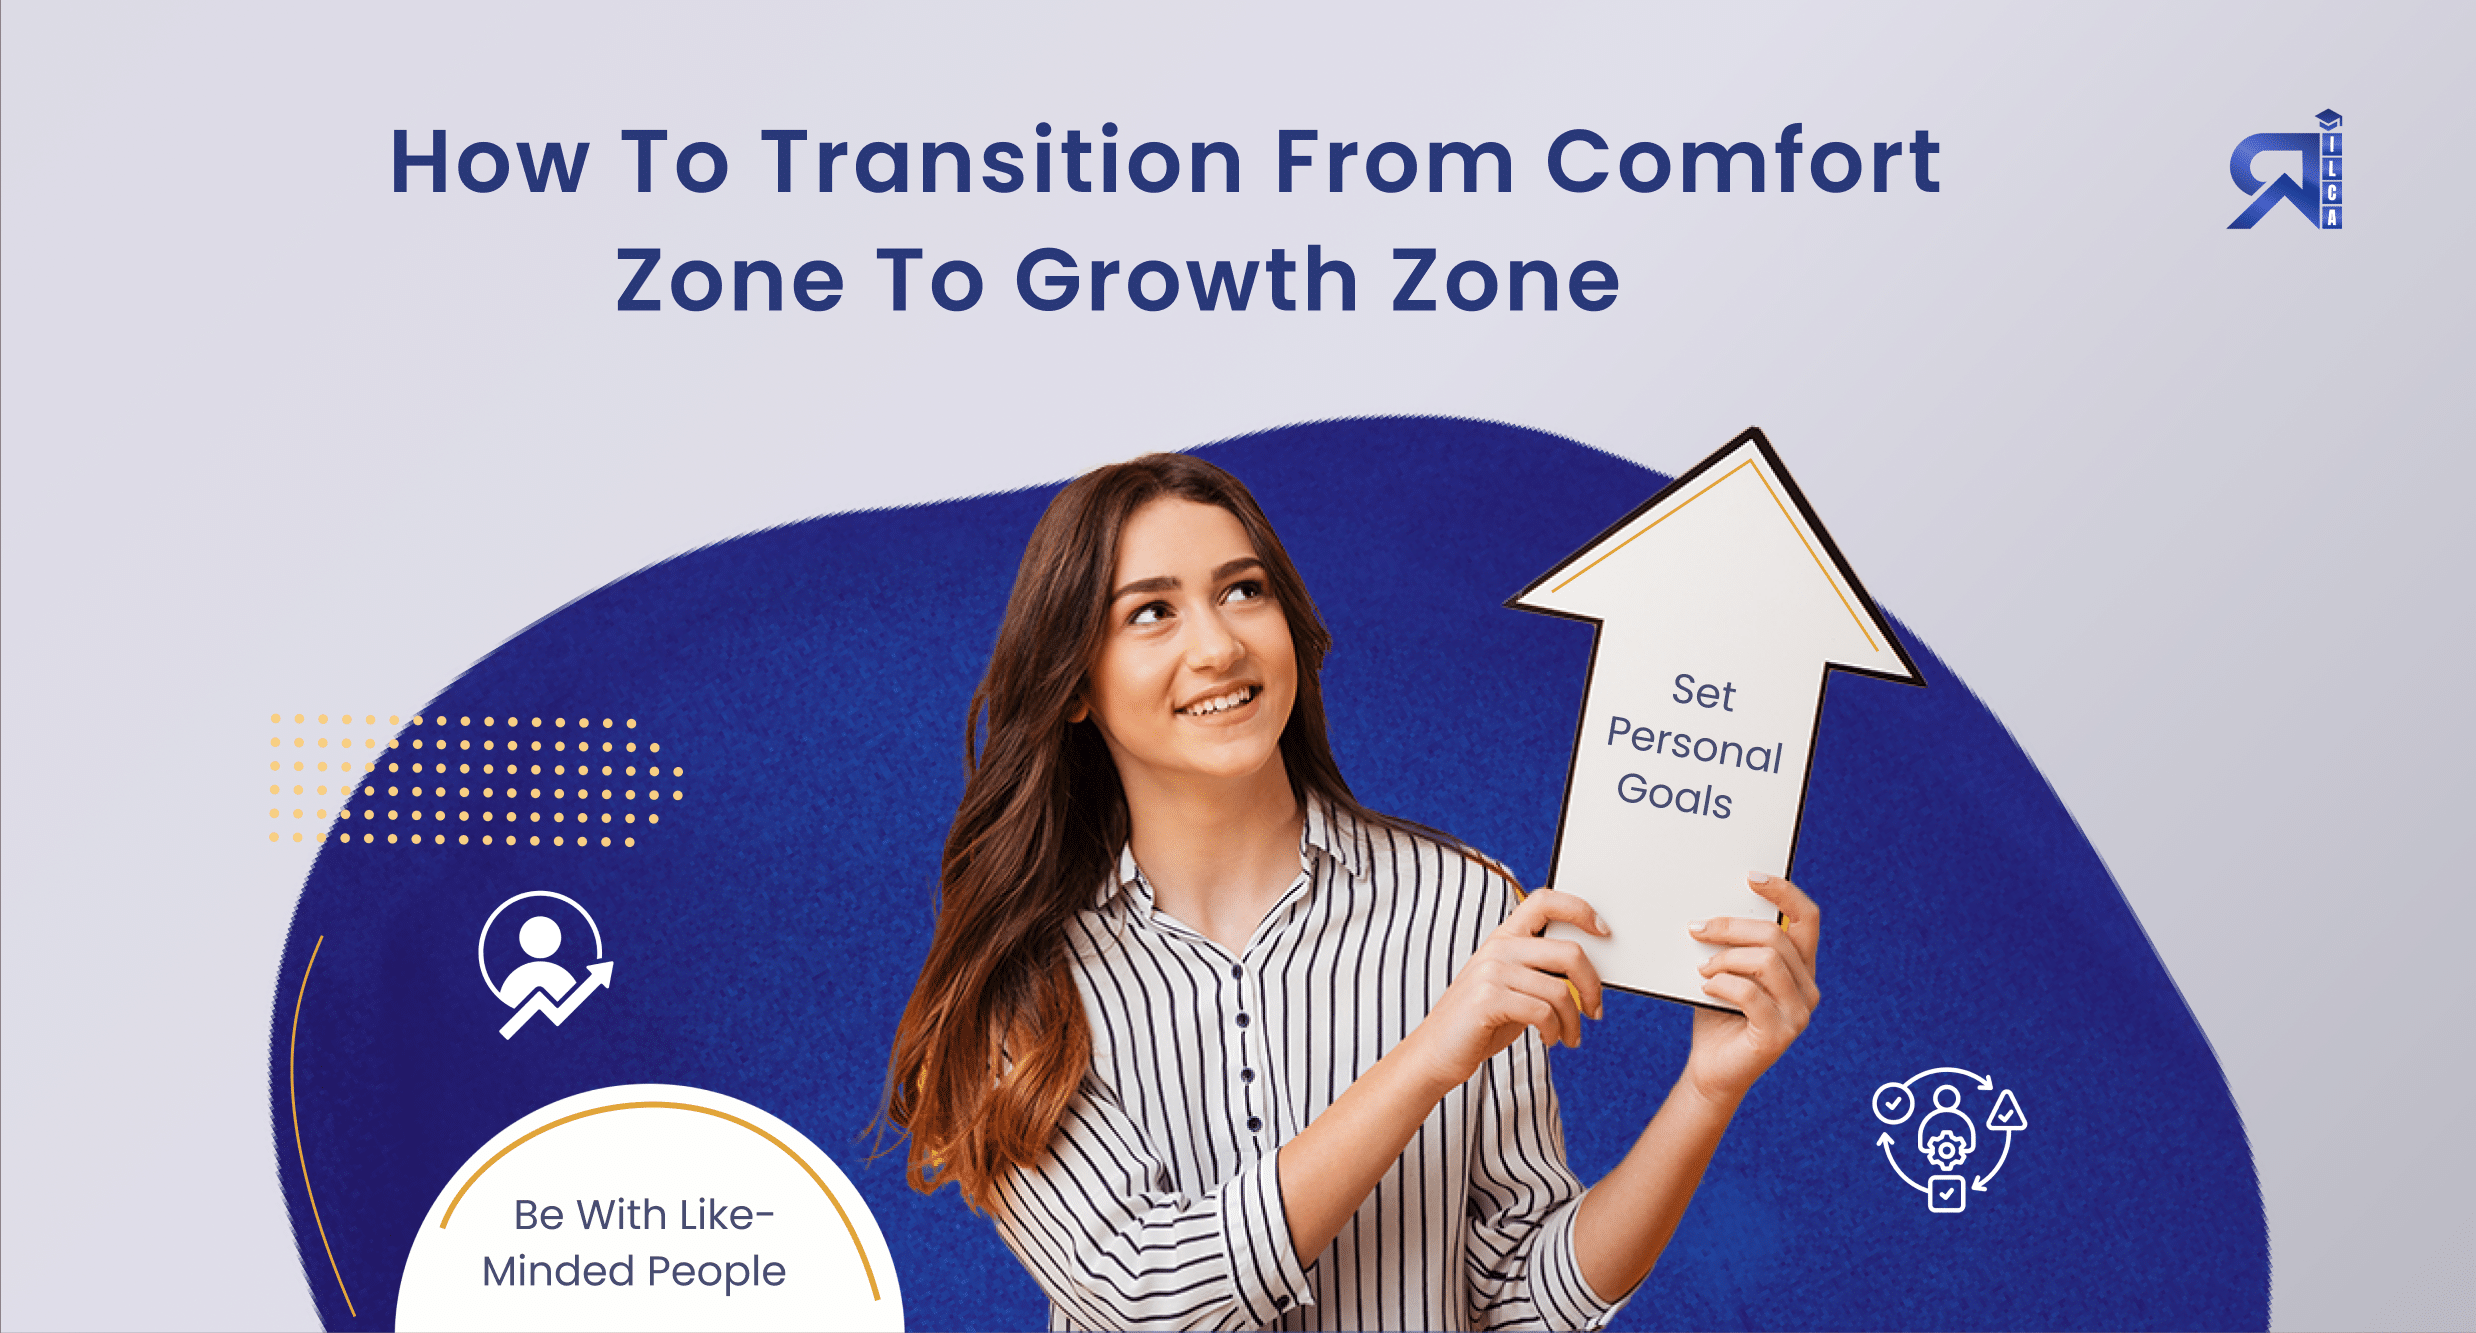 How To Transition From Comfort Zone To Growth Zone